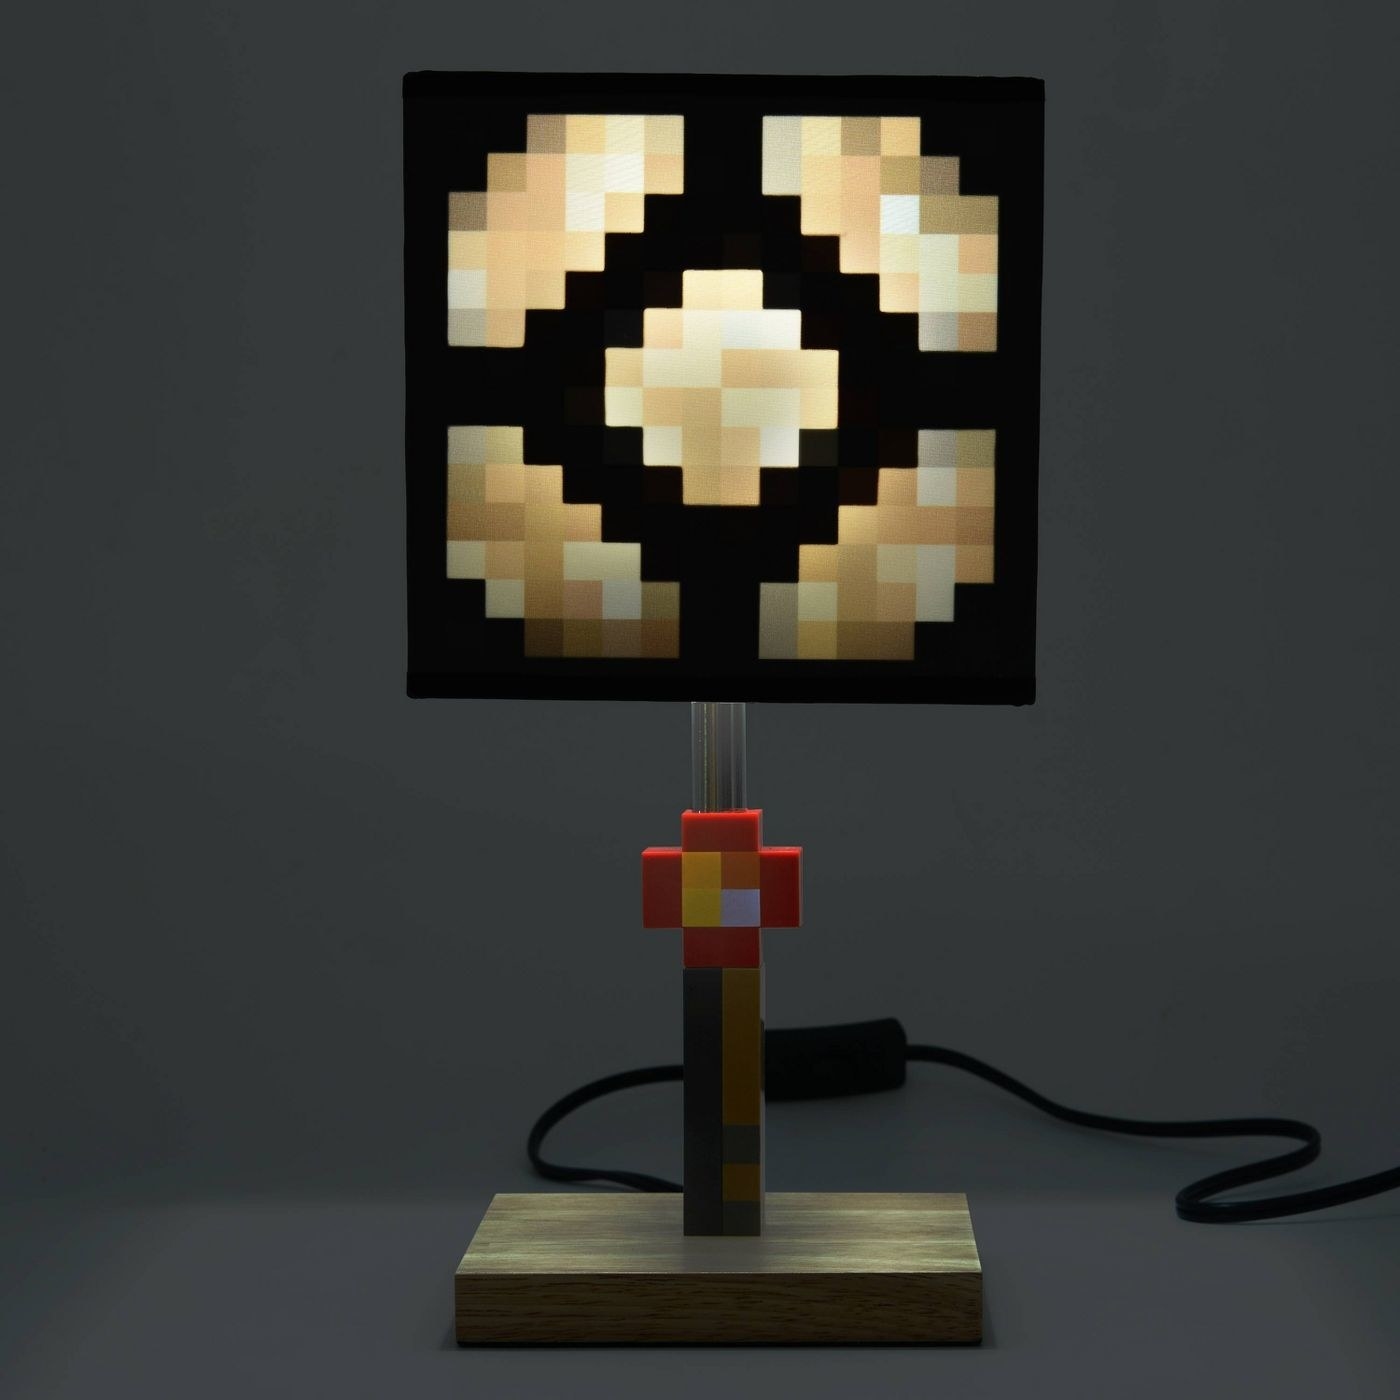 The table lamp